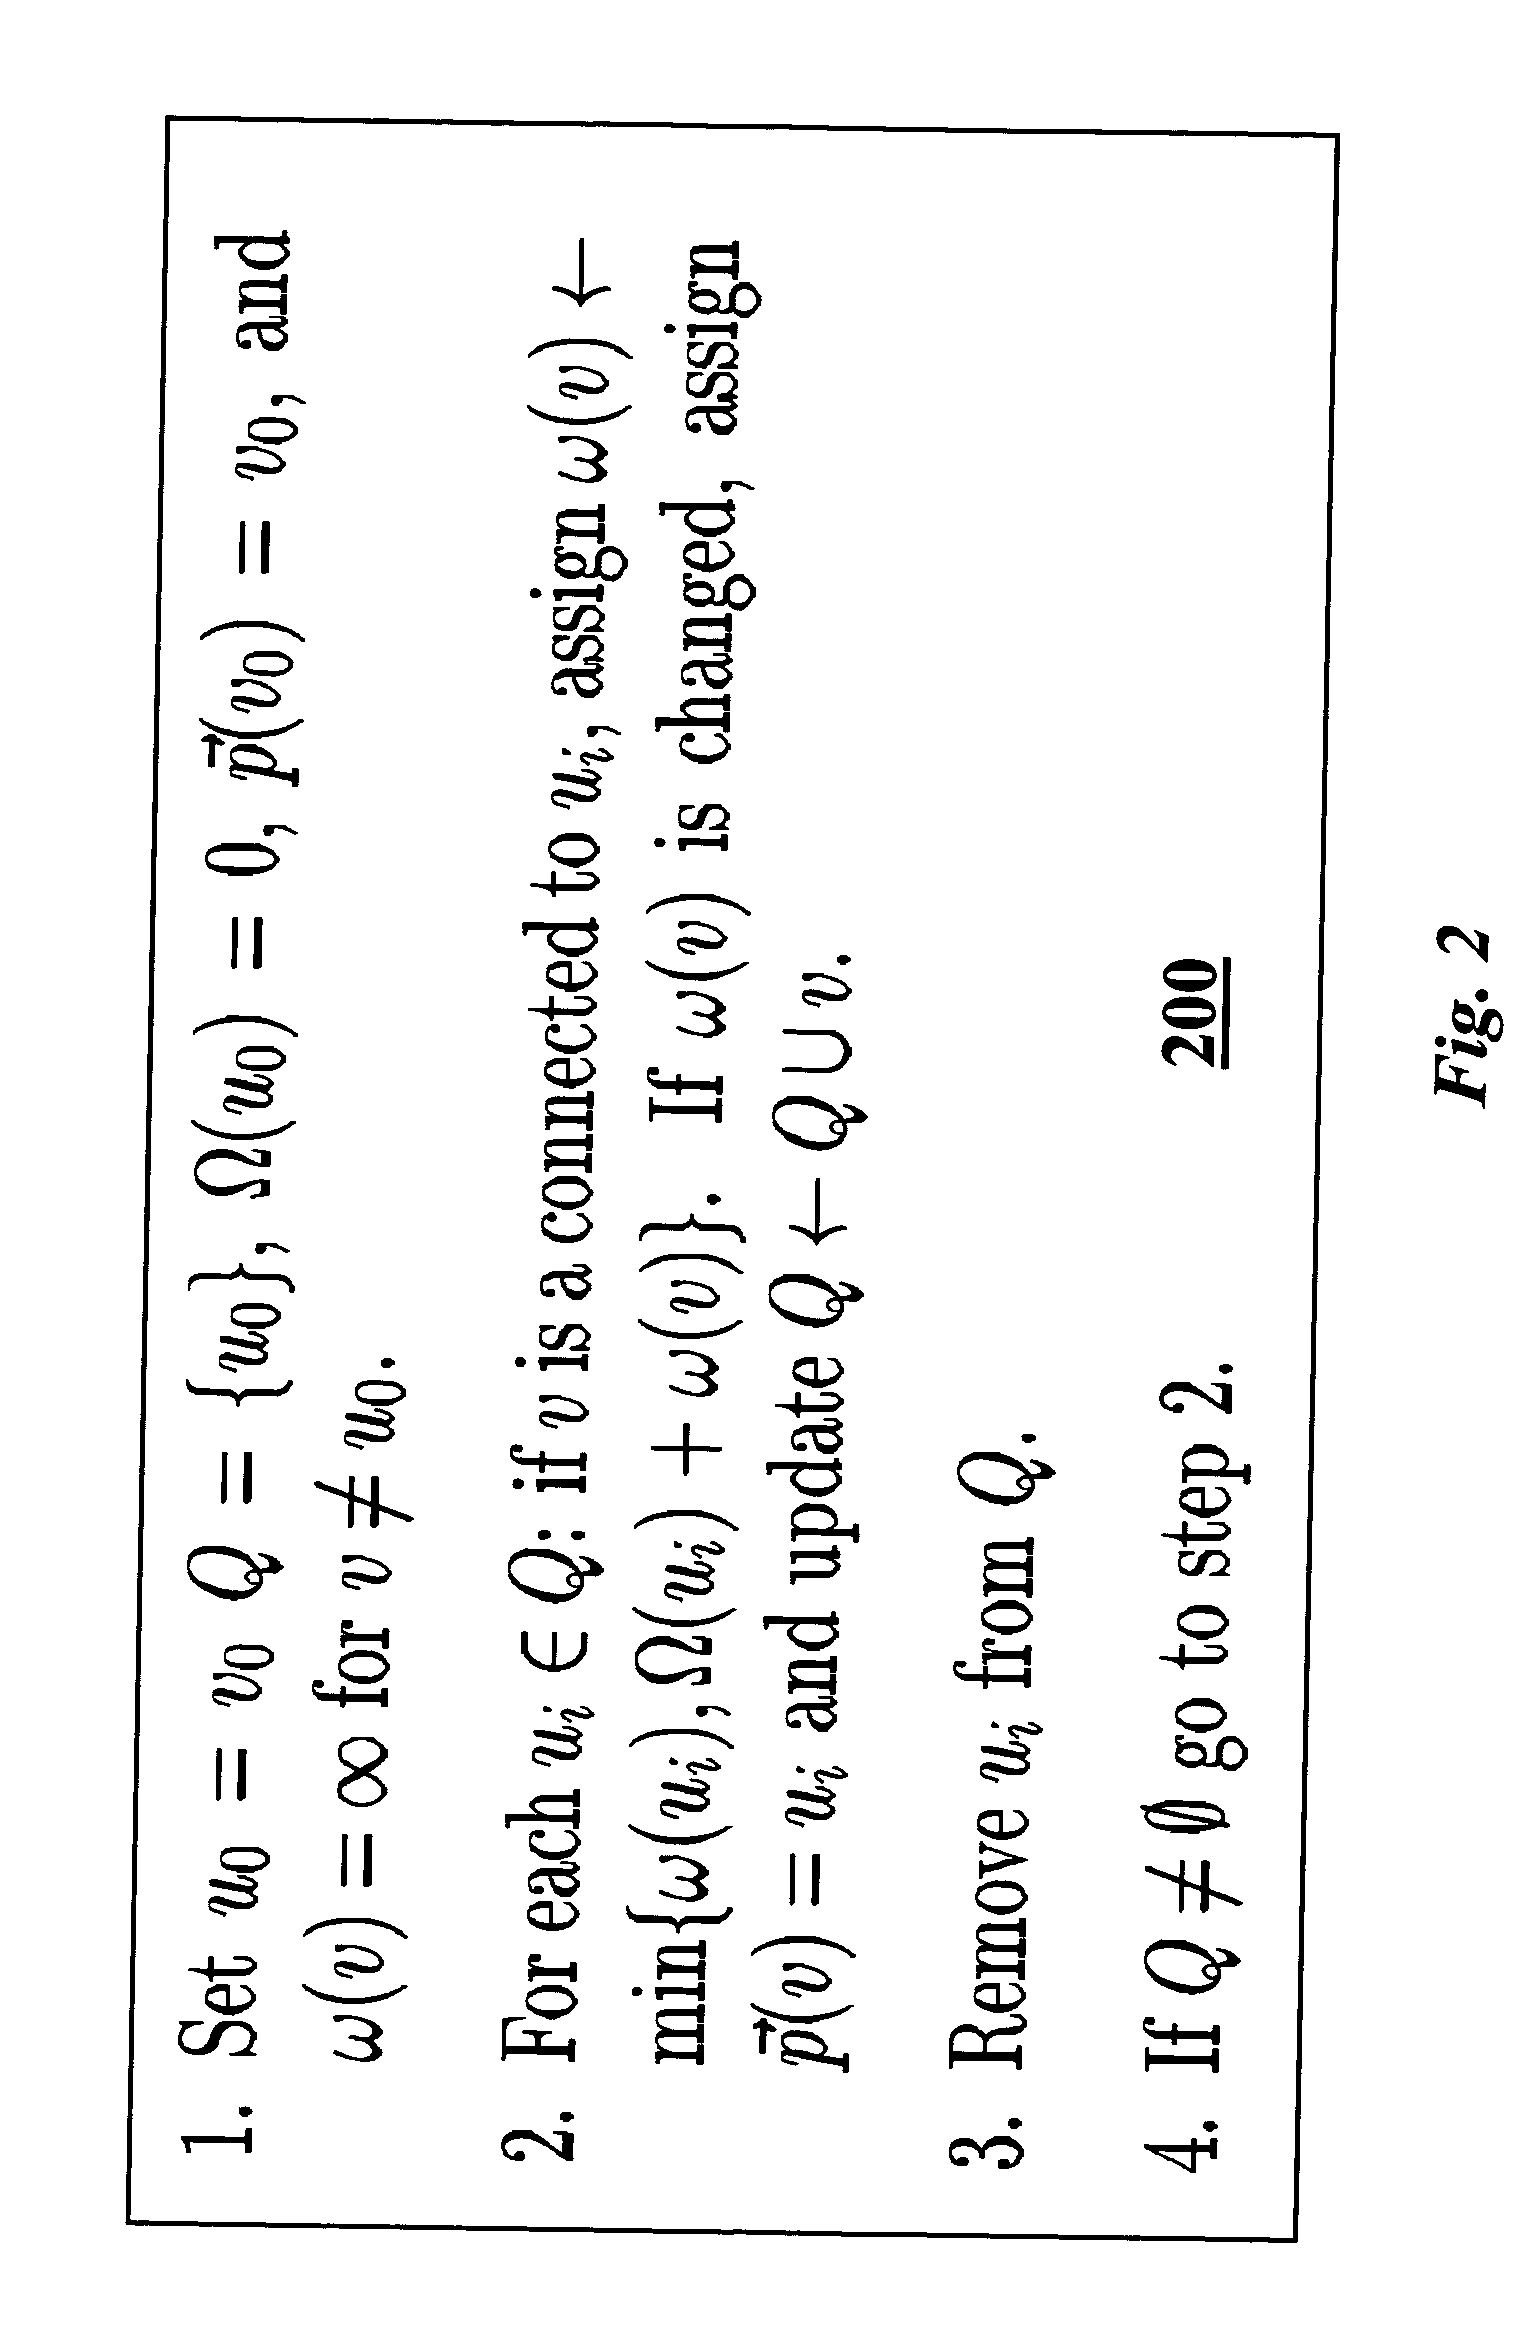 Method for determining similarities between data sequences using cross-correlation matrices and deformation functions